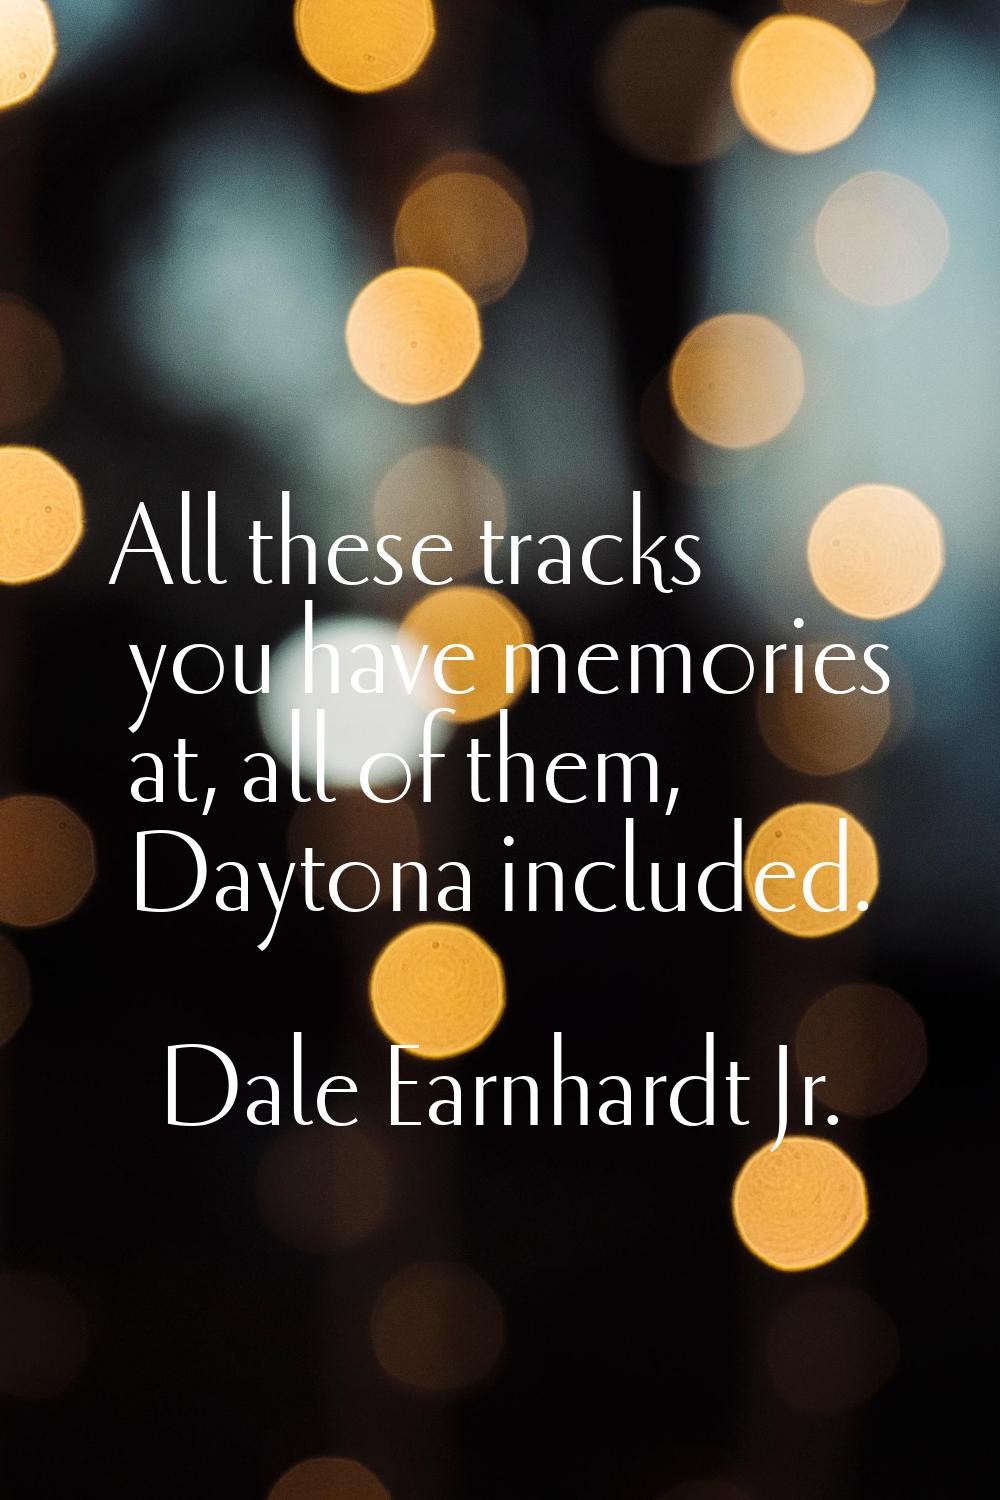 All these tracks you have memories at, all of them, Daytona included.